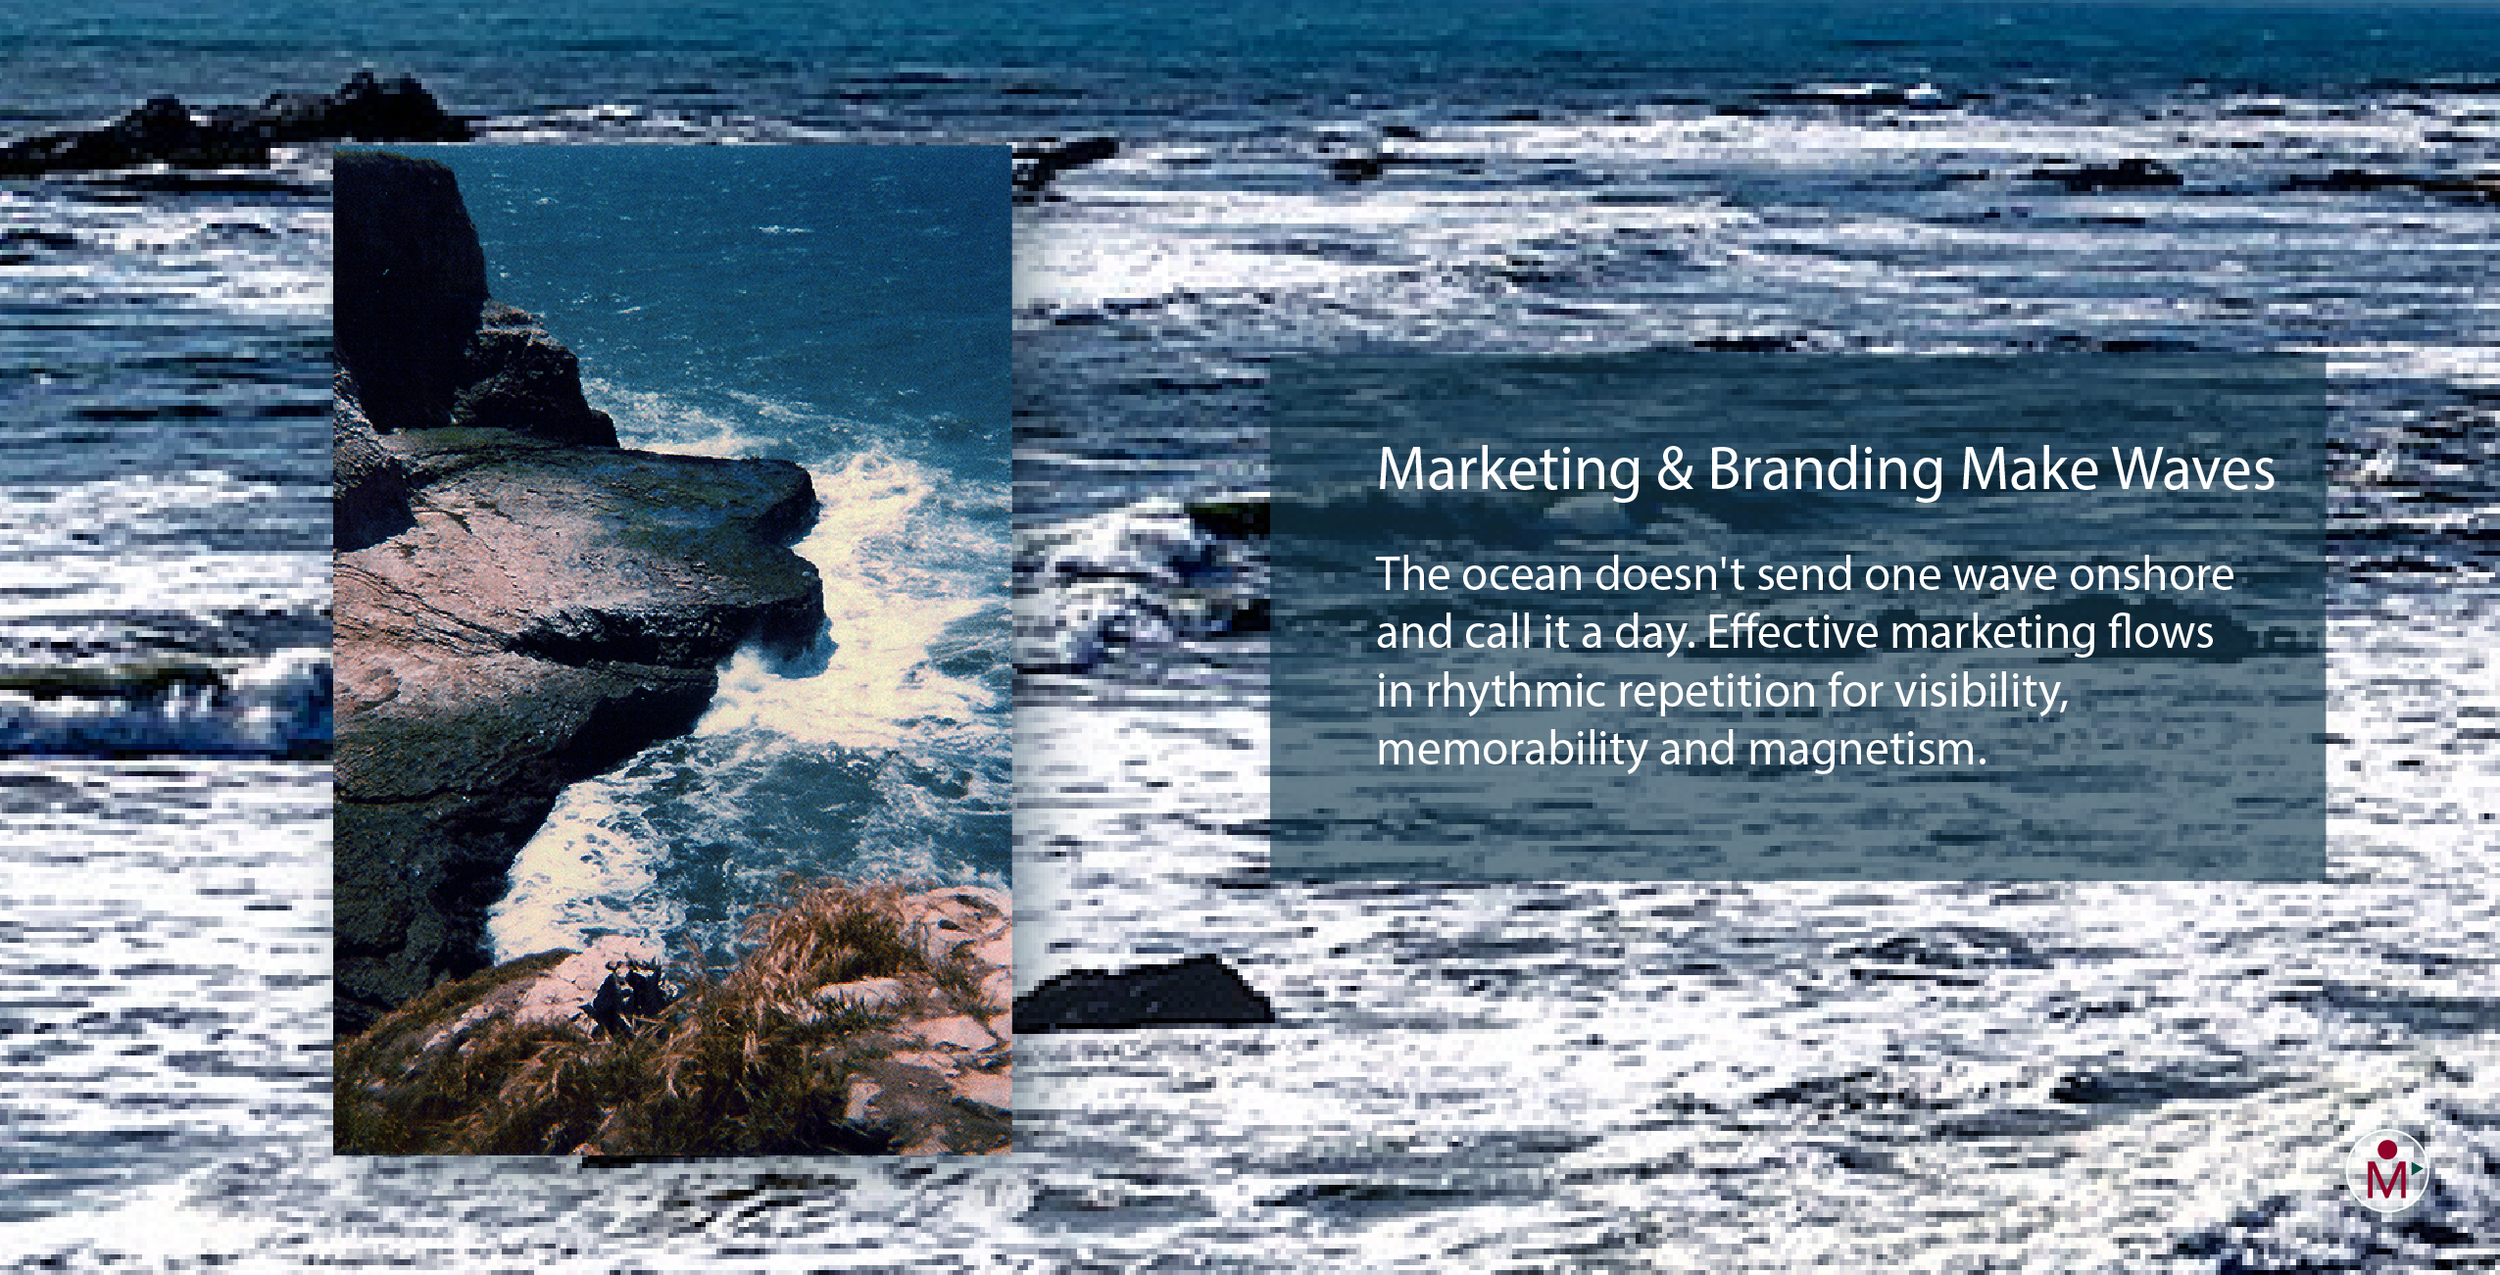 TMD mktg slideshow dac quote 3.png